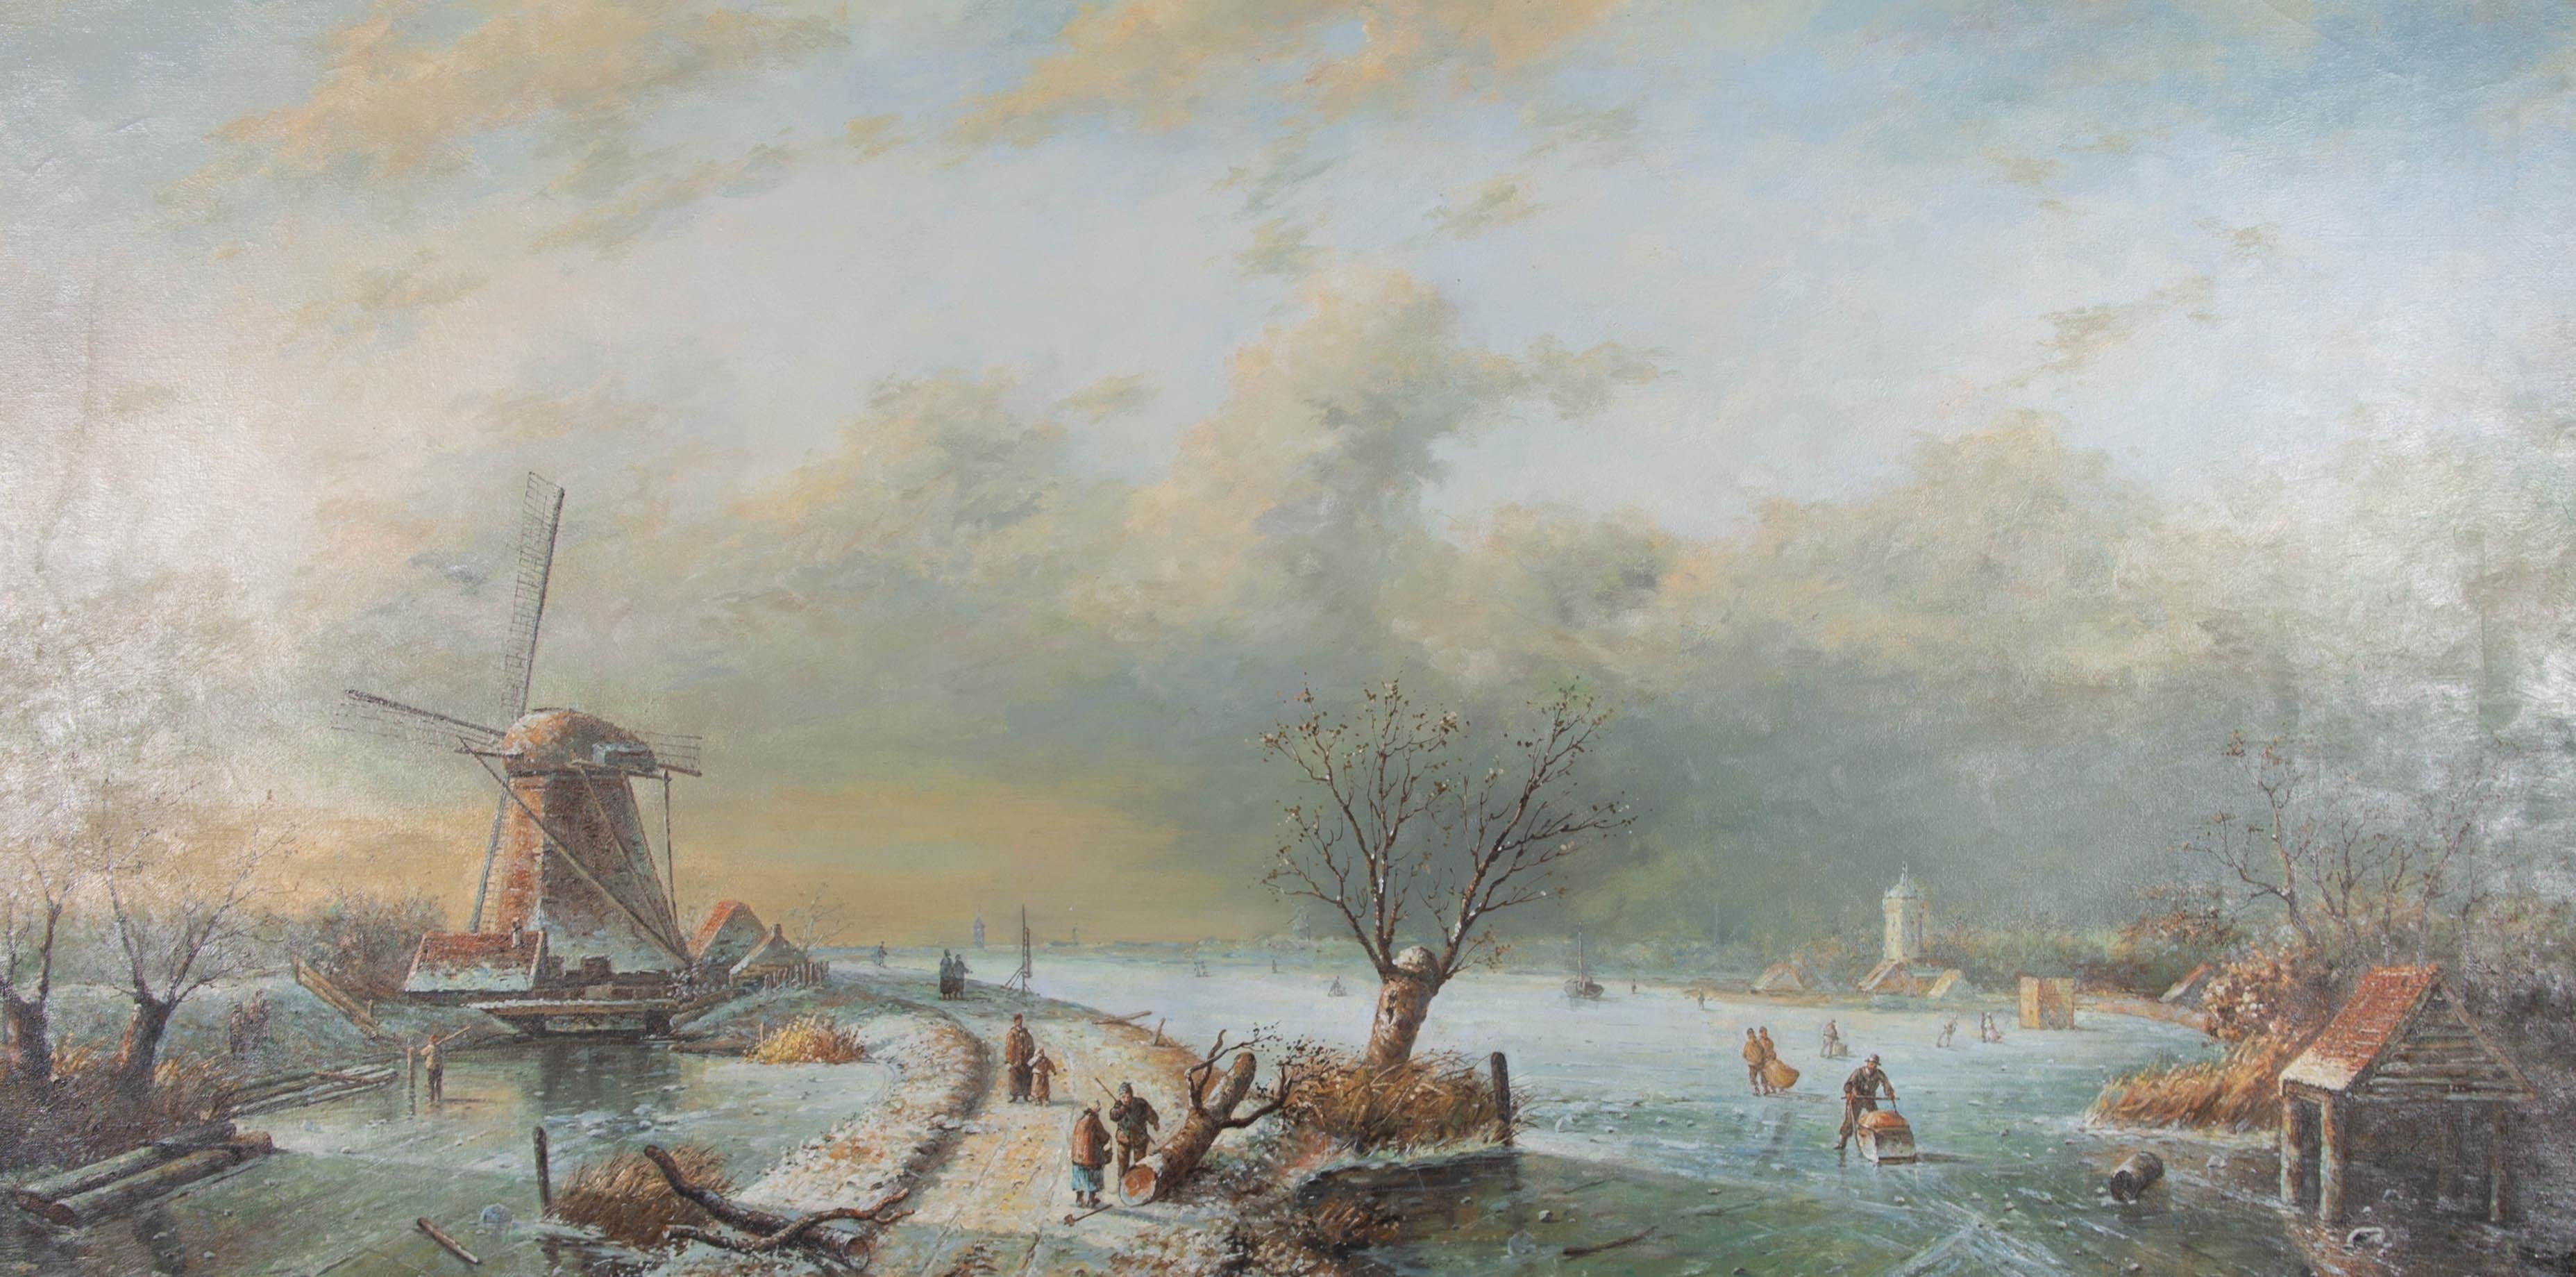 A fine 20th Century panoramic view in oil showing a frozen Dutch river with people skating and others working on the bank. There is a windmill to the left and the silhouette of a city on the distant horizon. The painting is unsigned and presented in